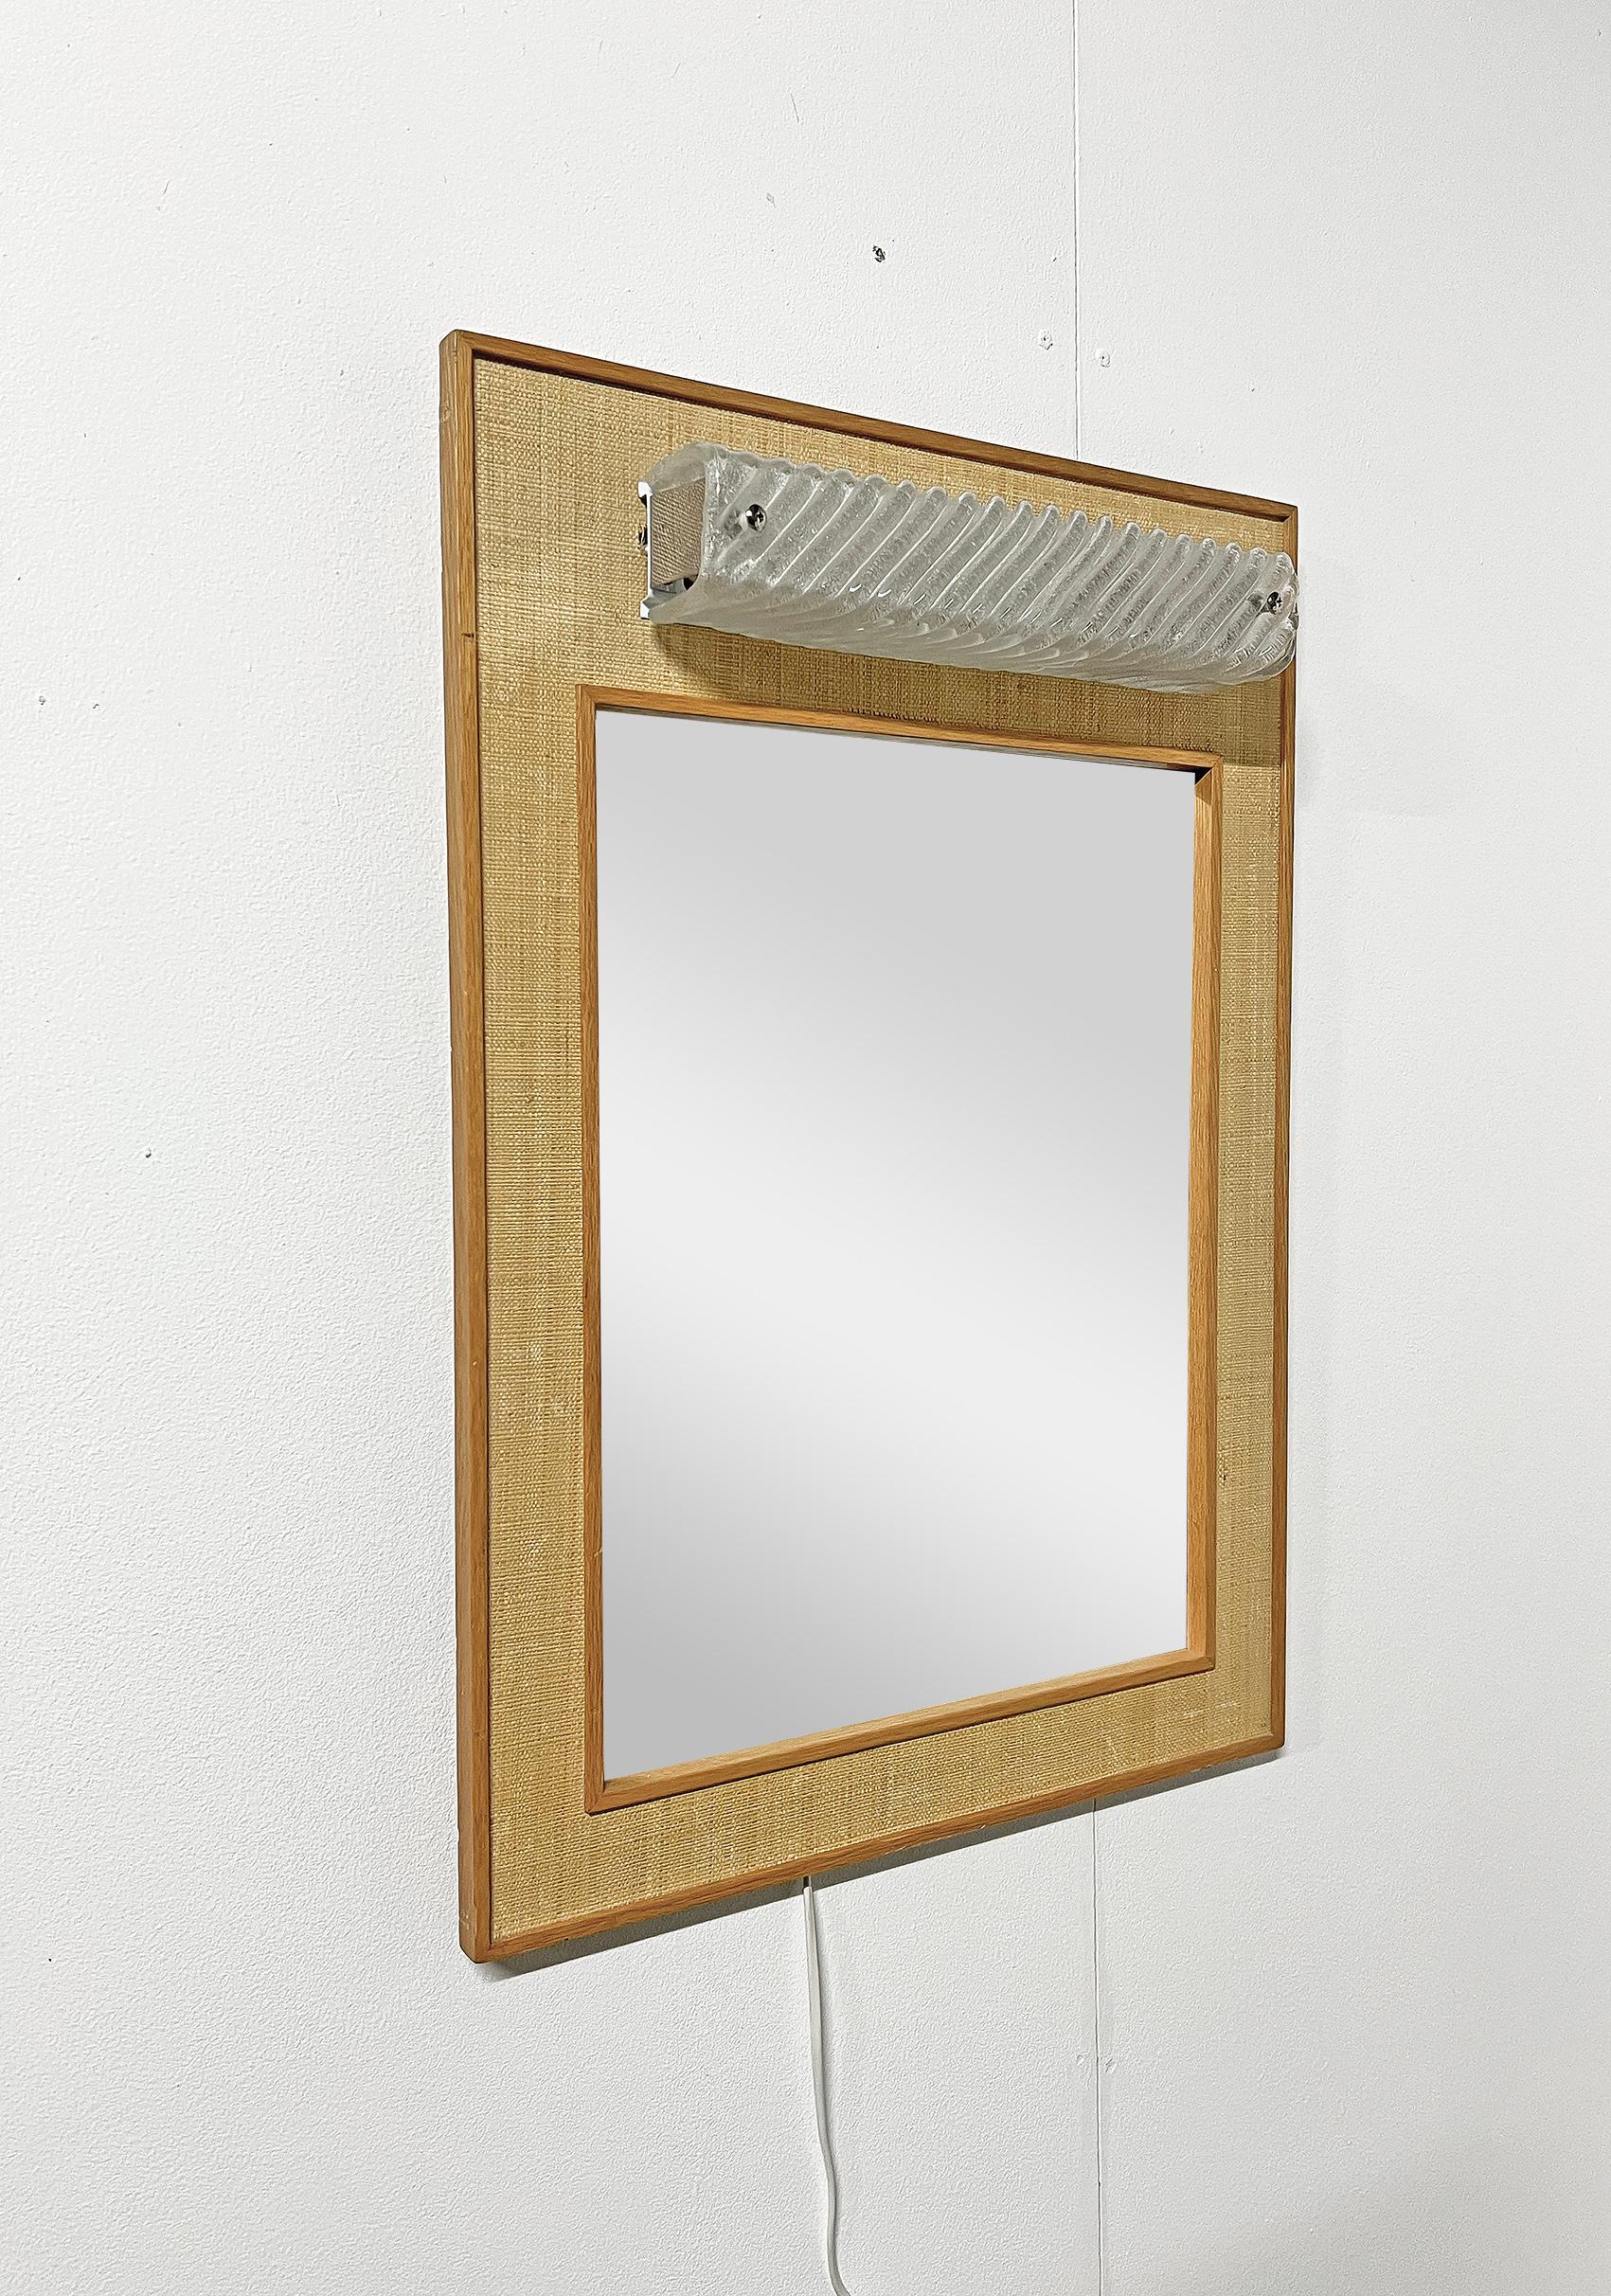 Scandinavian Modern wall mirror with lighting, Fröseke AB Nybrofabriken,  ca 1950's. 
Signed with makers mark.
Good vintage condition, wear and patina consistent with age and use. 
Wear and patina on rattan and oak. Scratches.